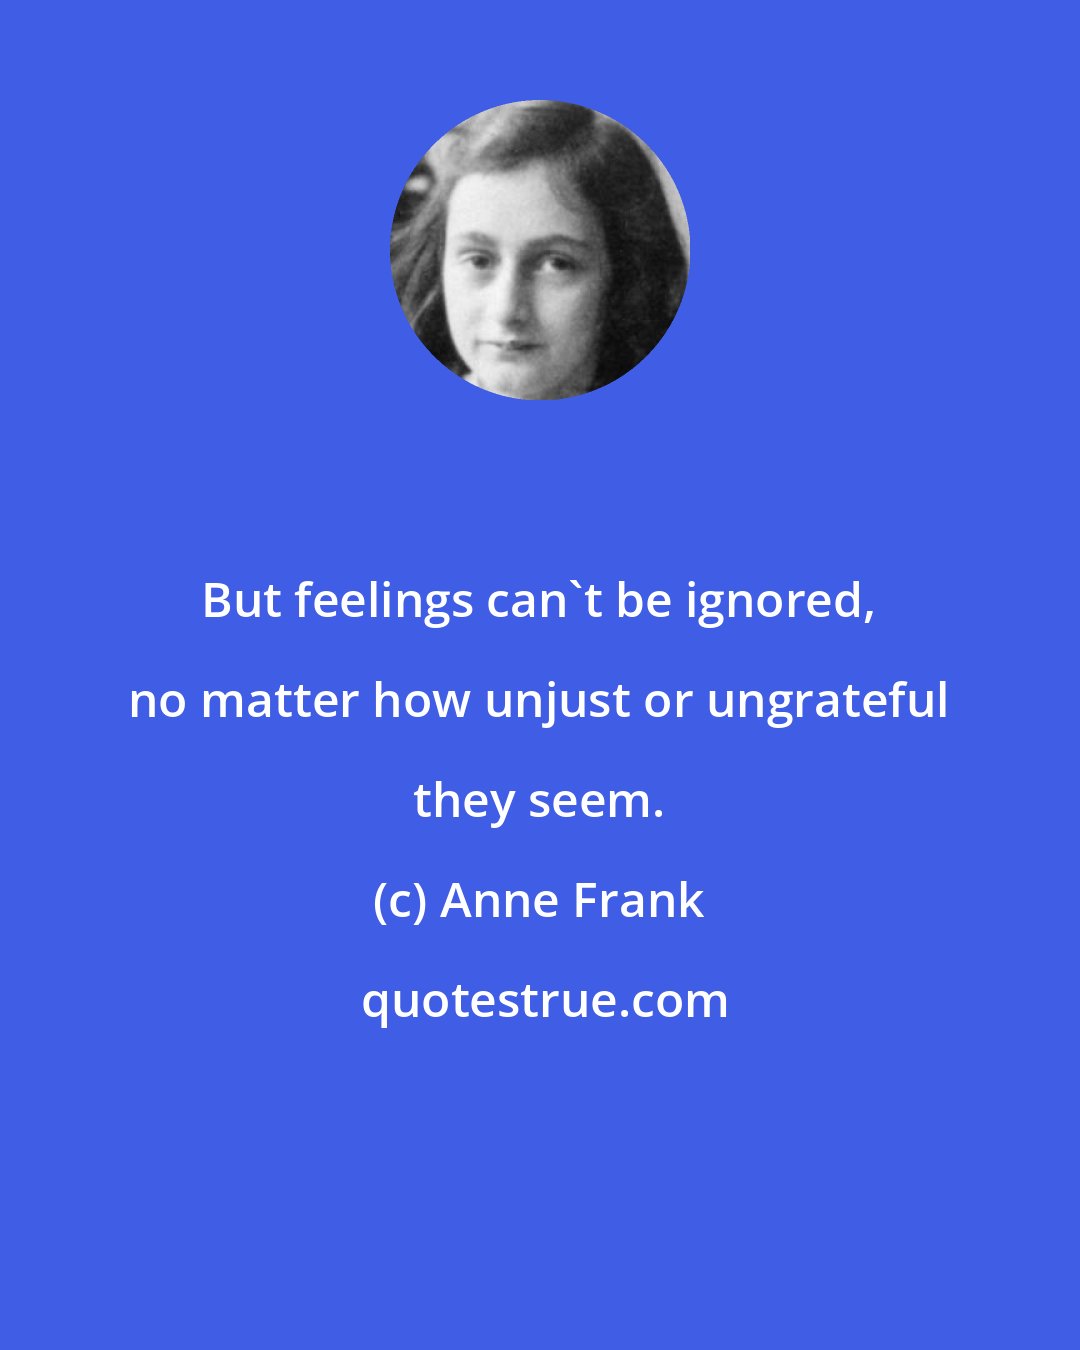 Anne Frank: But feelings can't be ignored, no matter how unjust or ungrateful they seem.